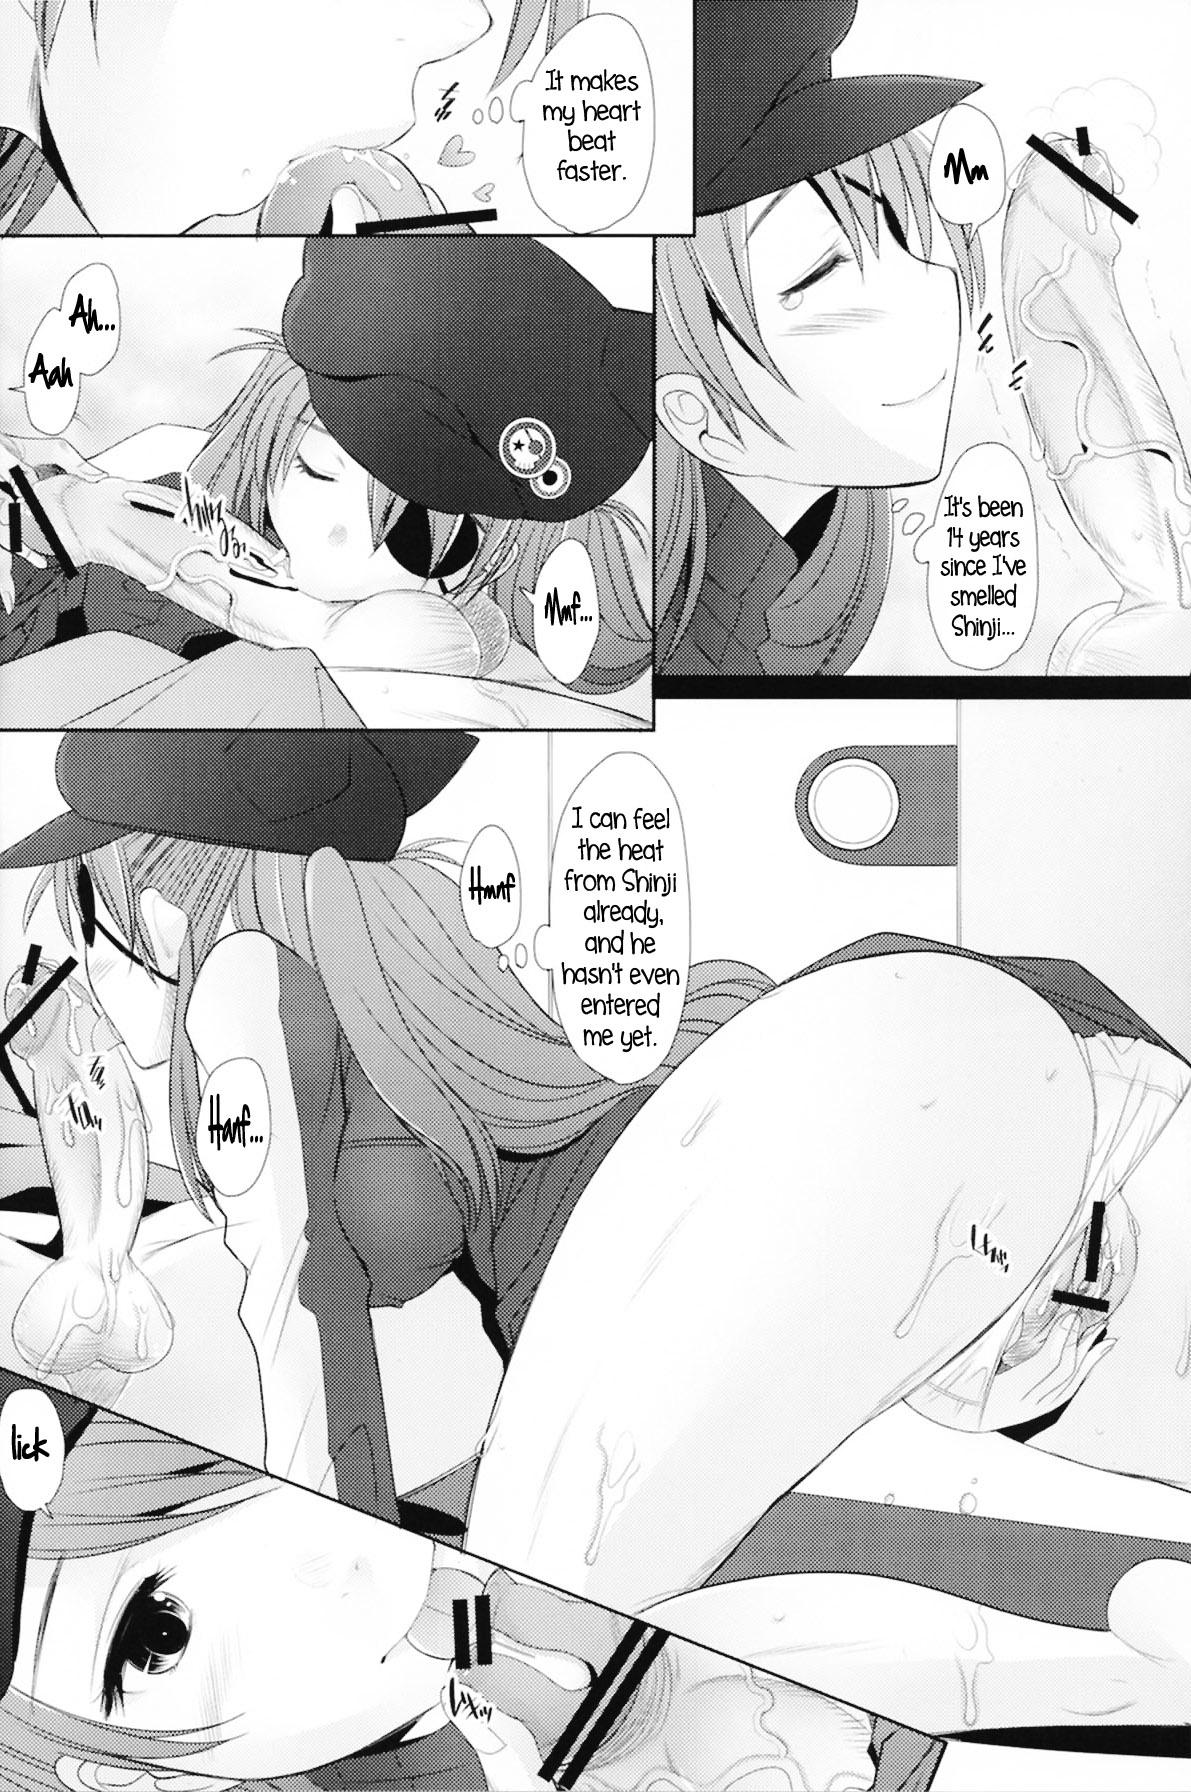 Twinks Confusion LEVEL Q - Neon genesis evangelion Hot Naked Girl - Page 6